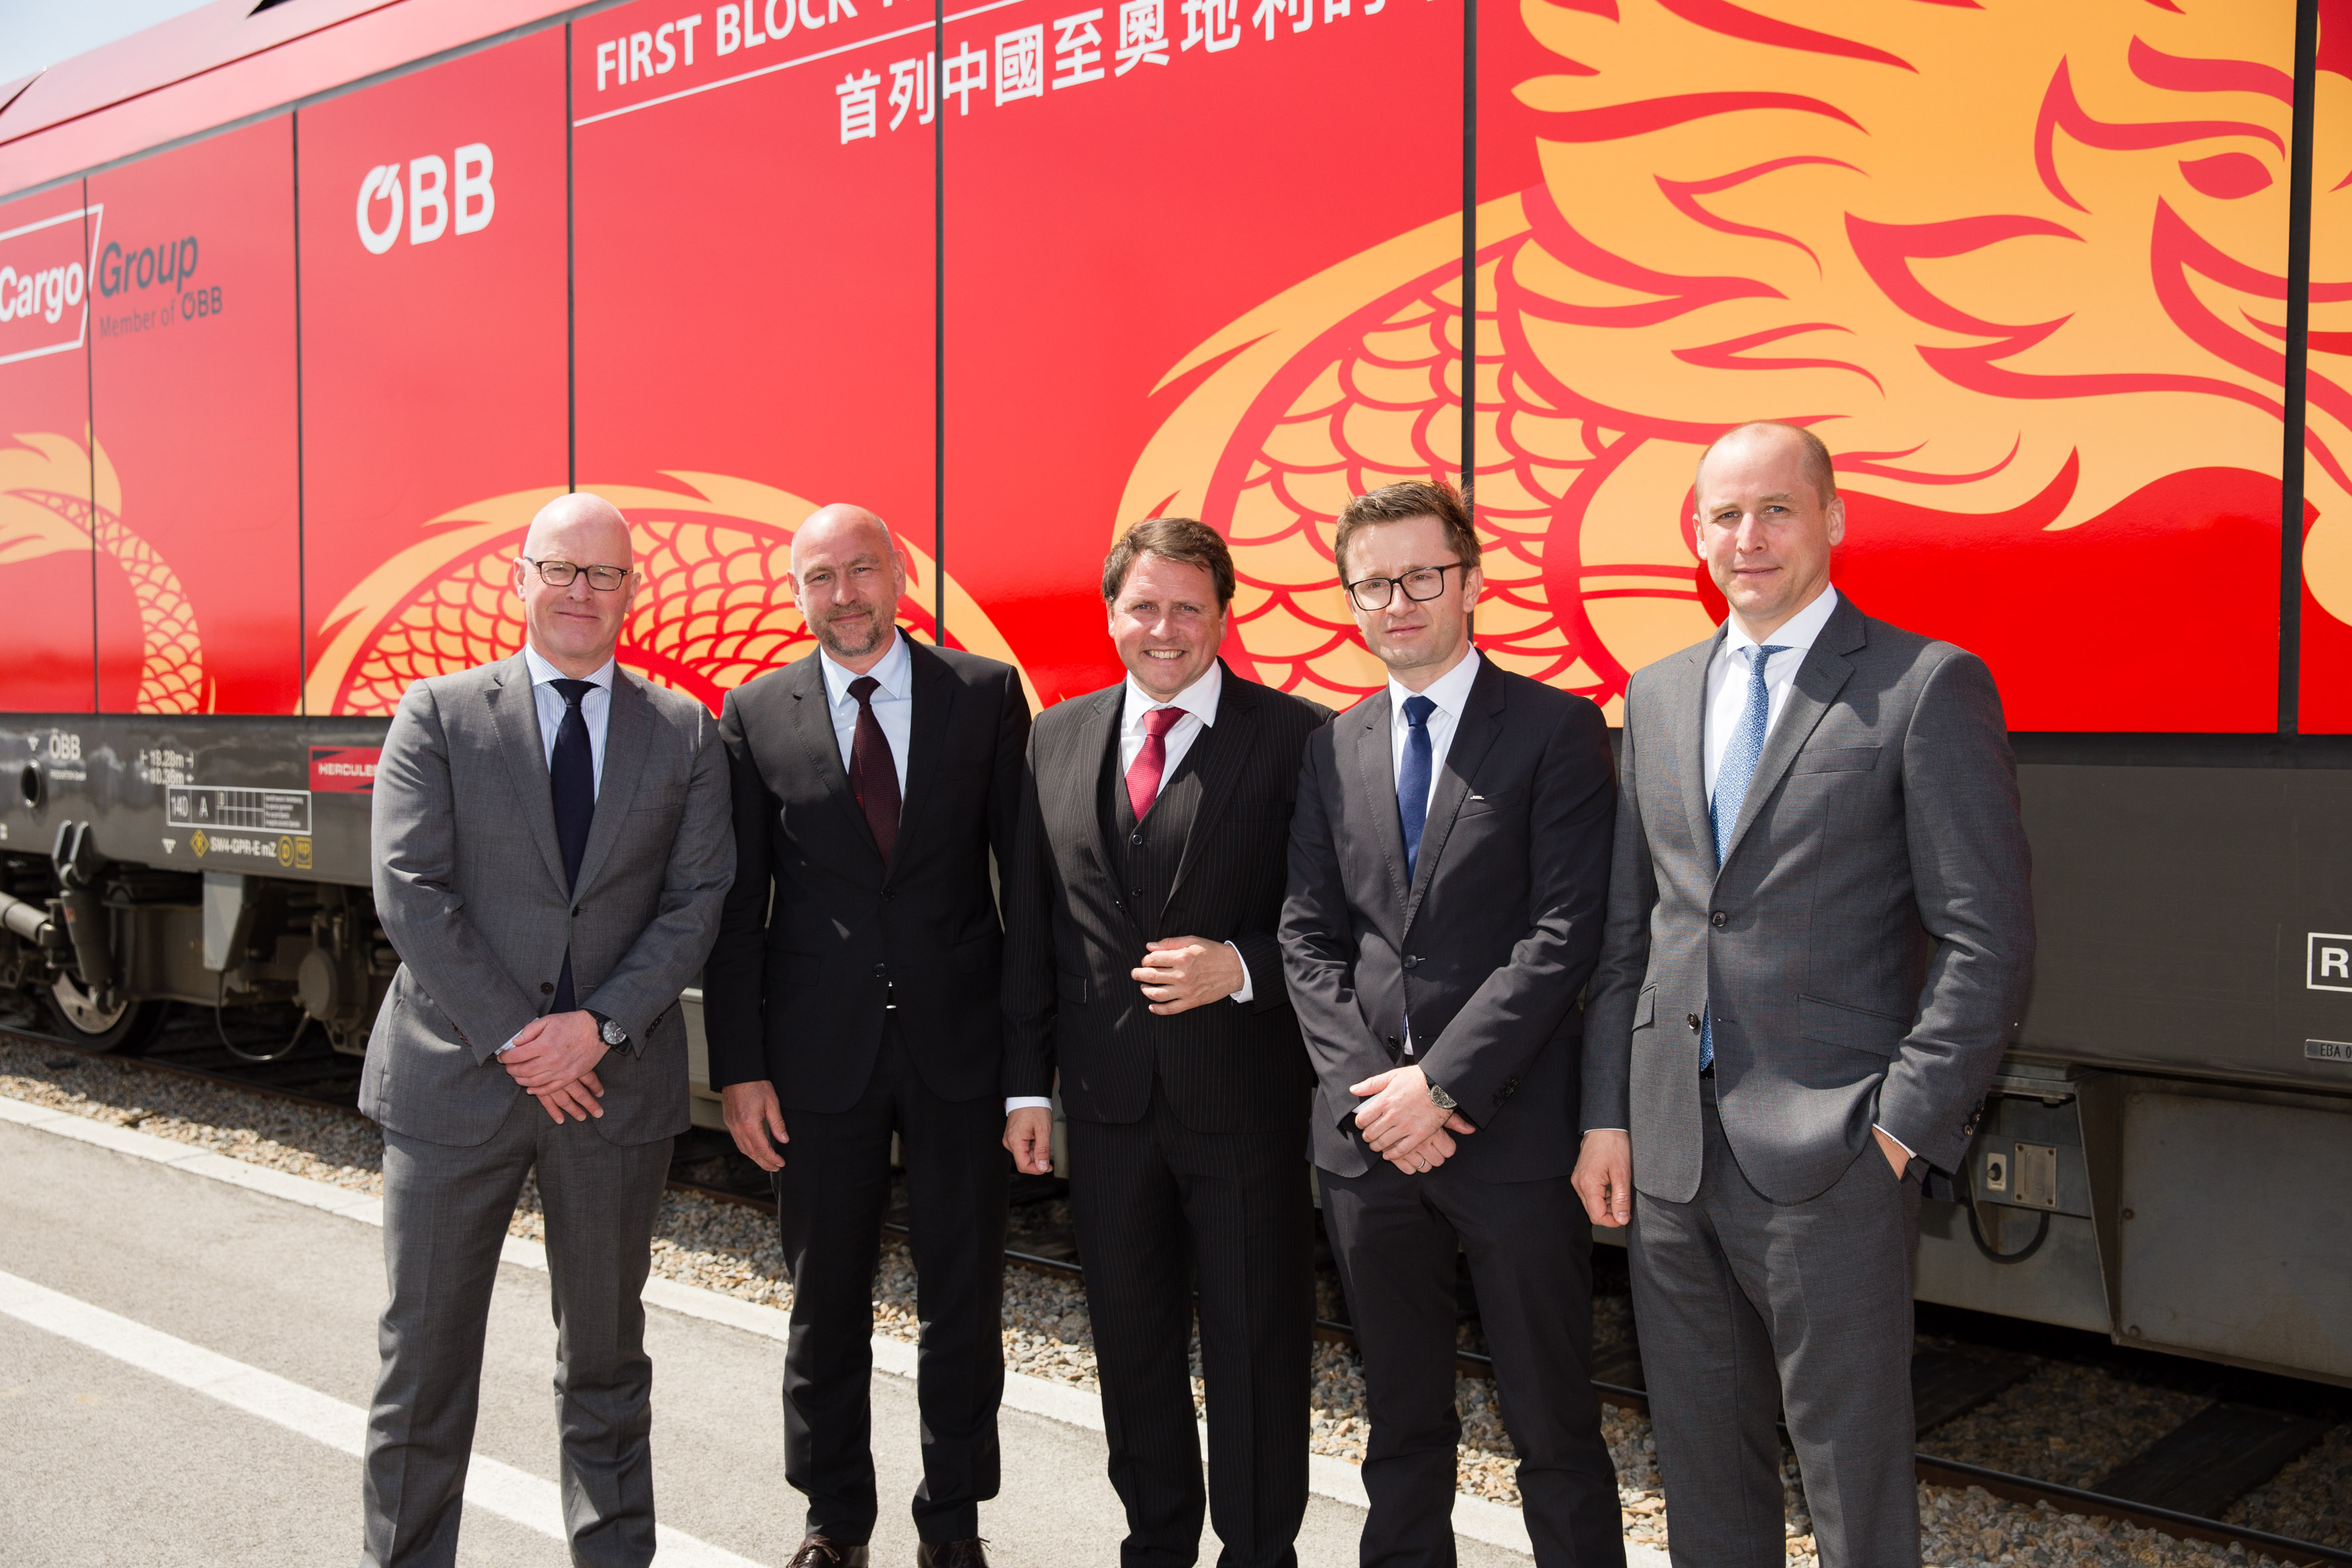 RCG and DHL are expanding the Silk Road network